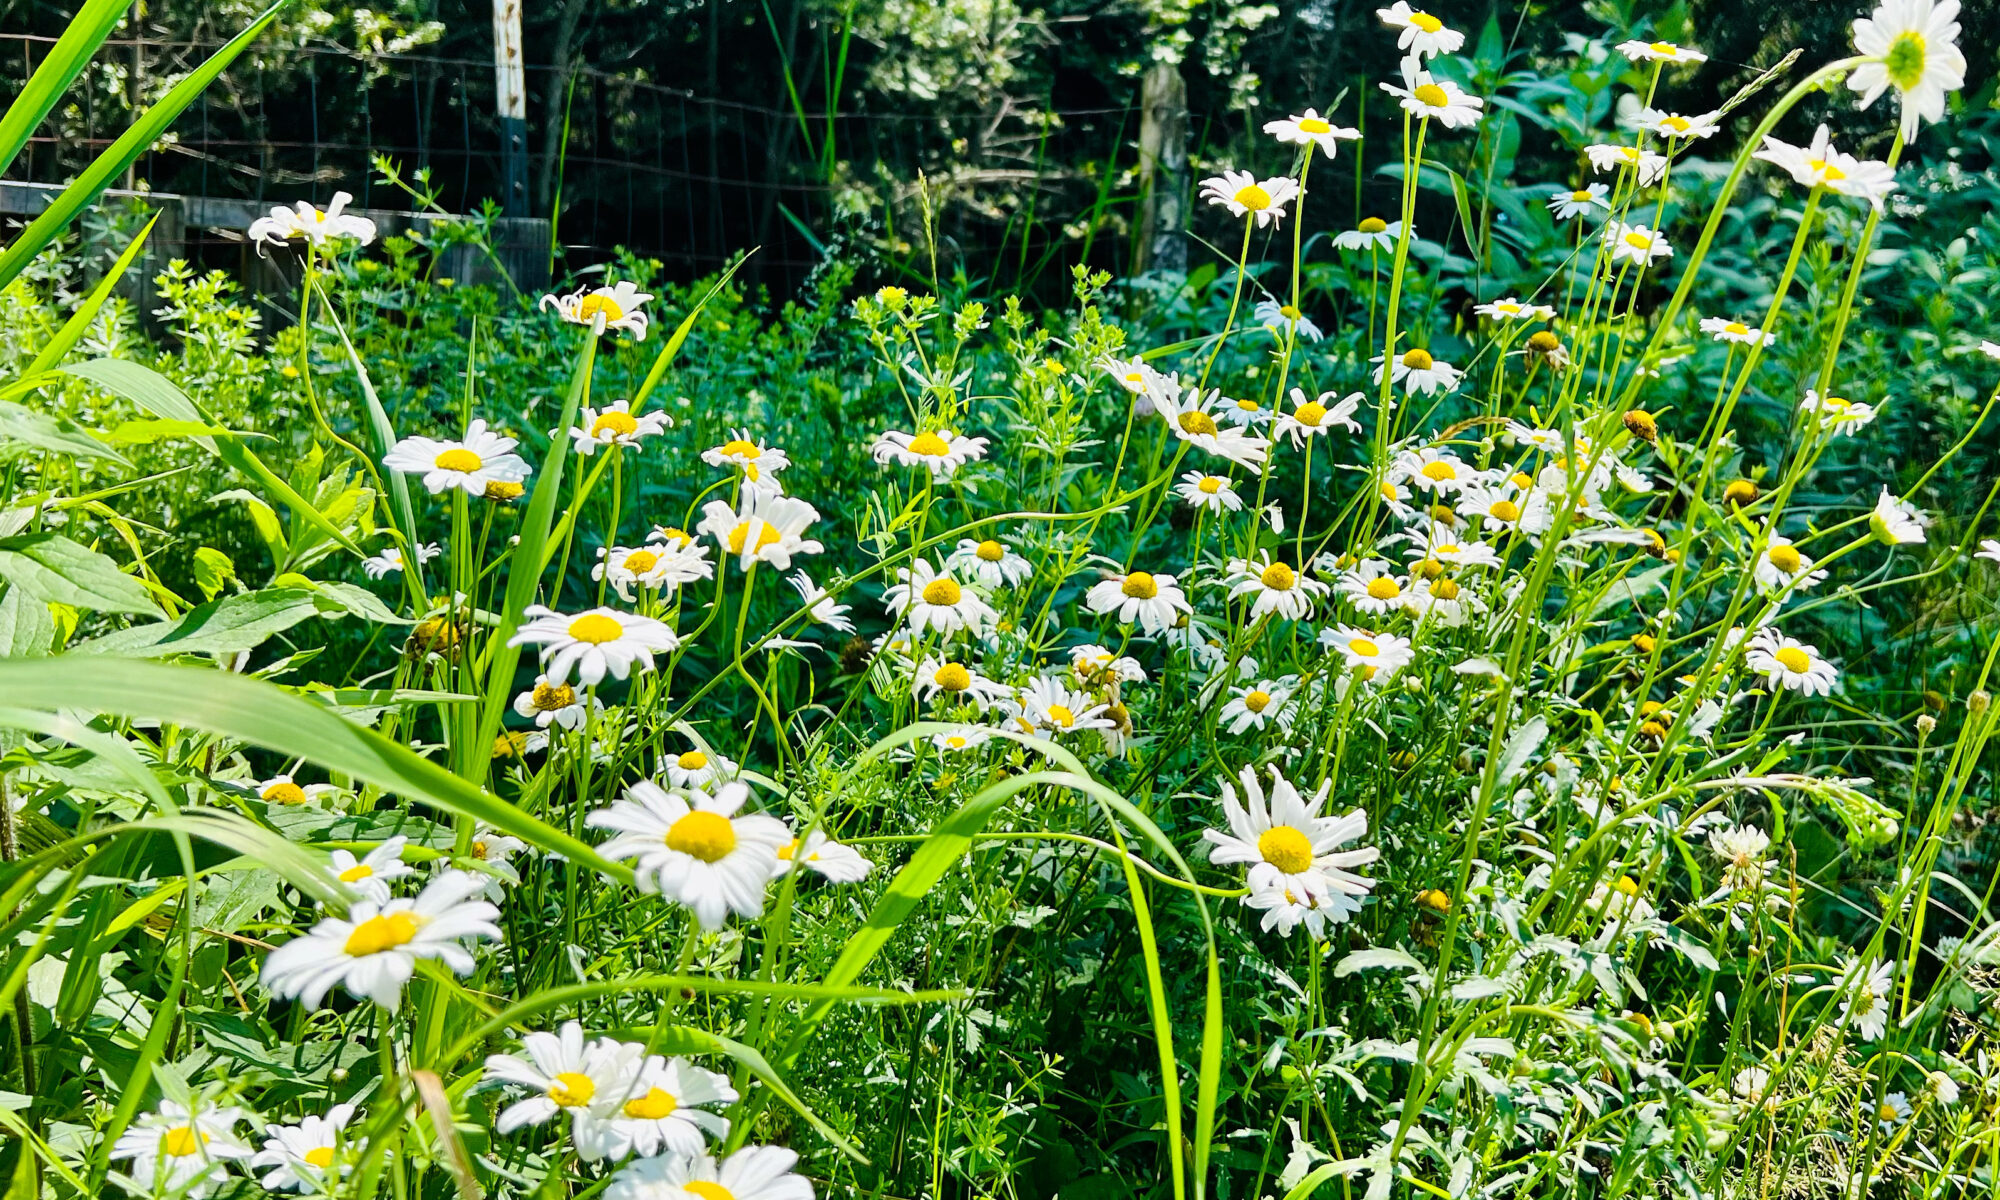 Field of daisies with trees in background.